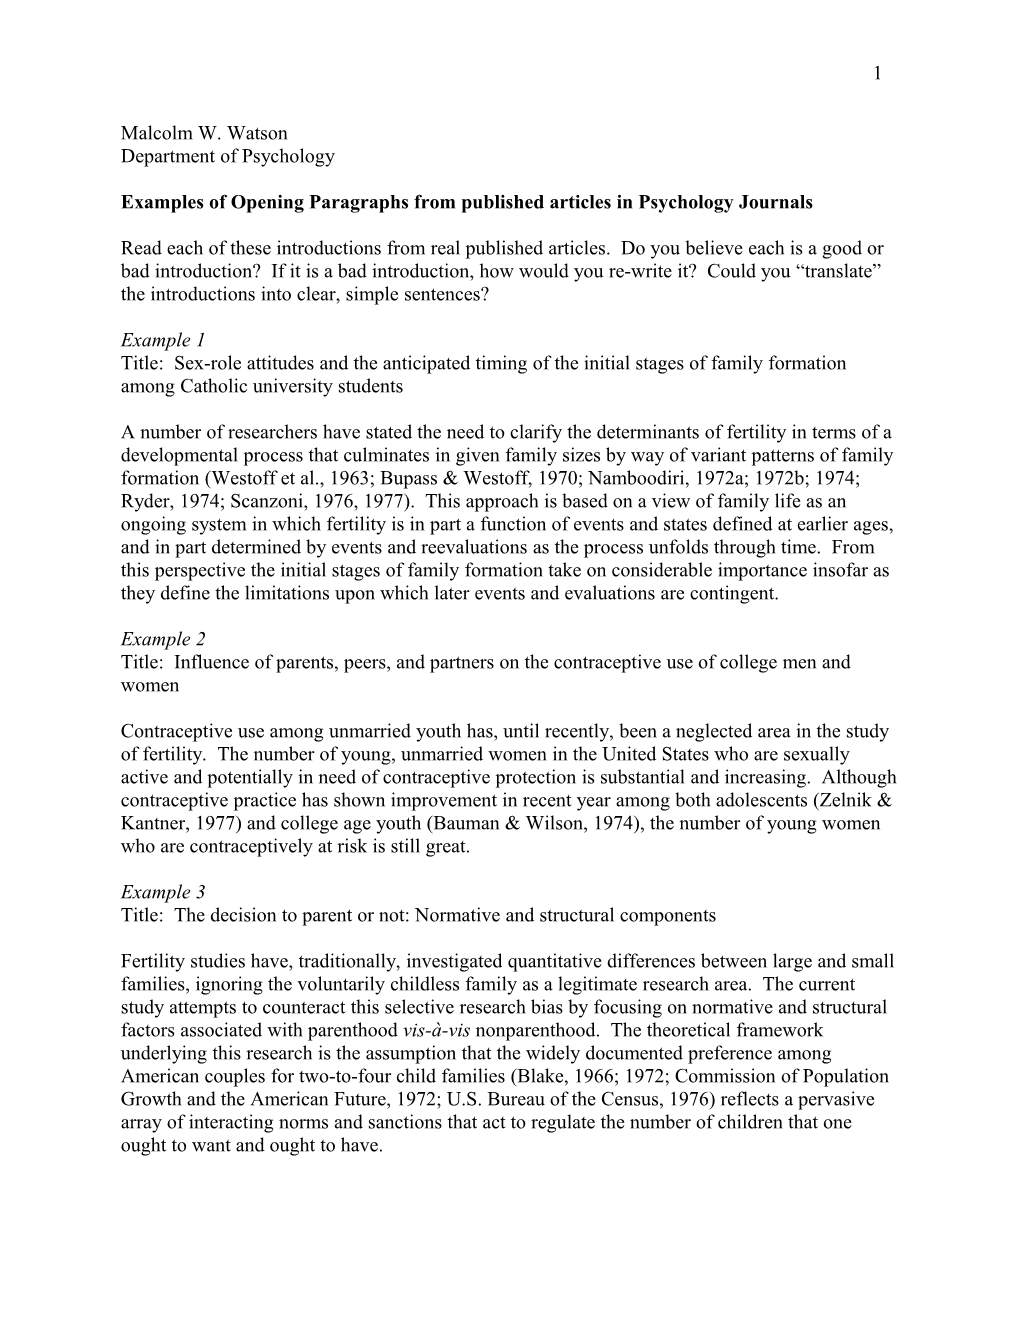 Examples of Opening Paragraphs from Published Articles in Psychology Journals